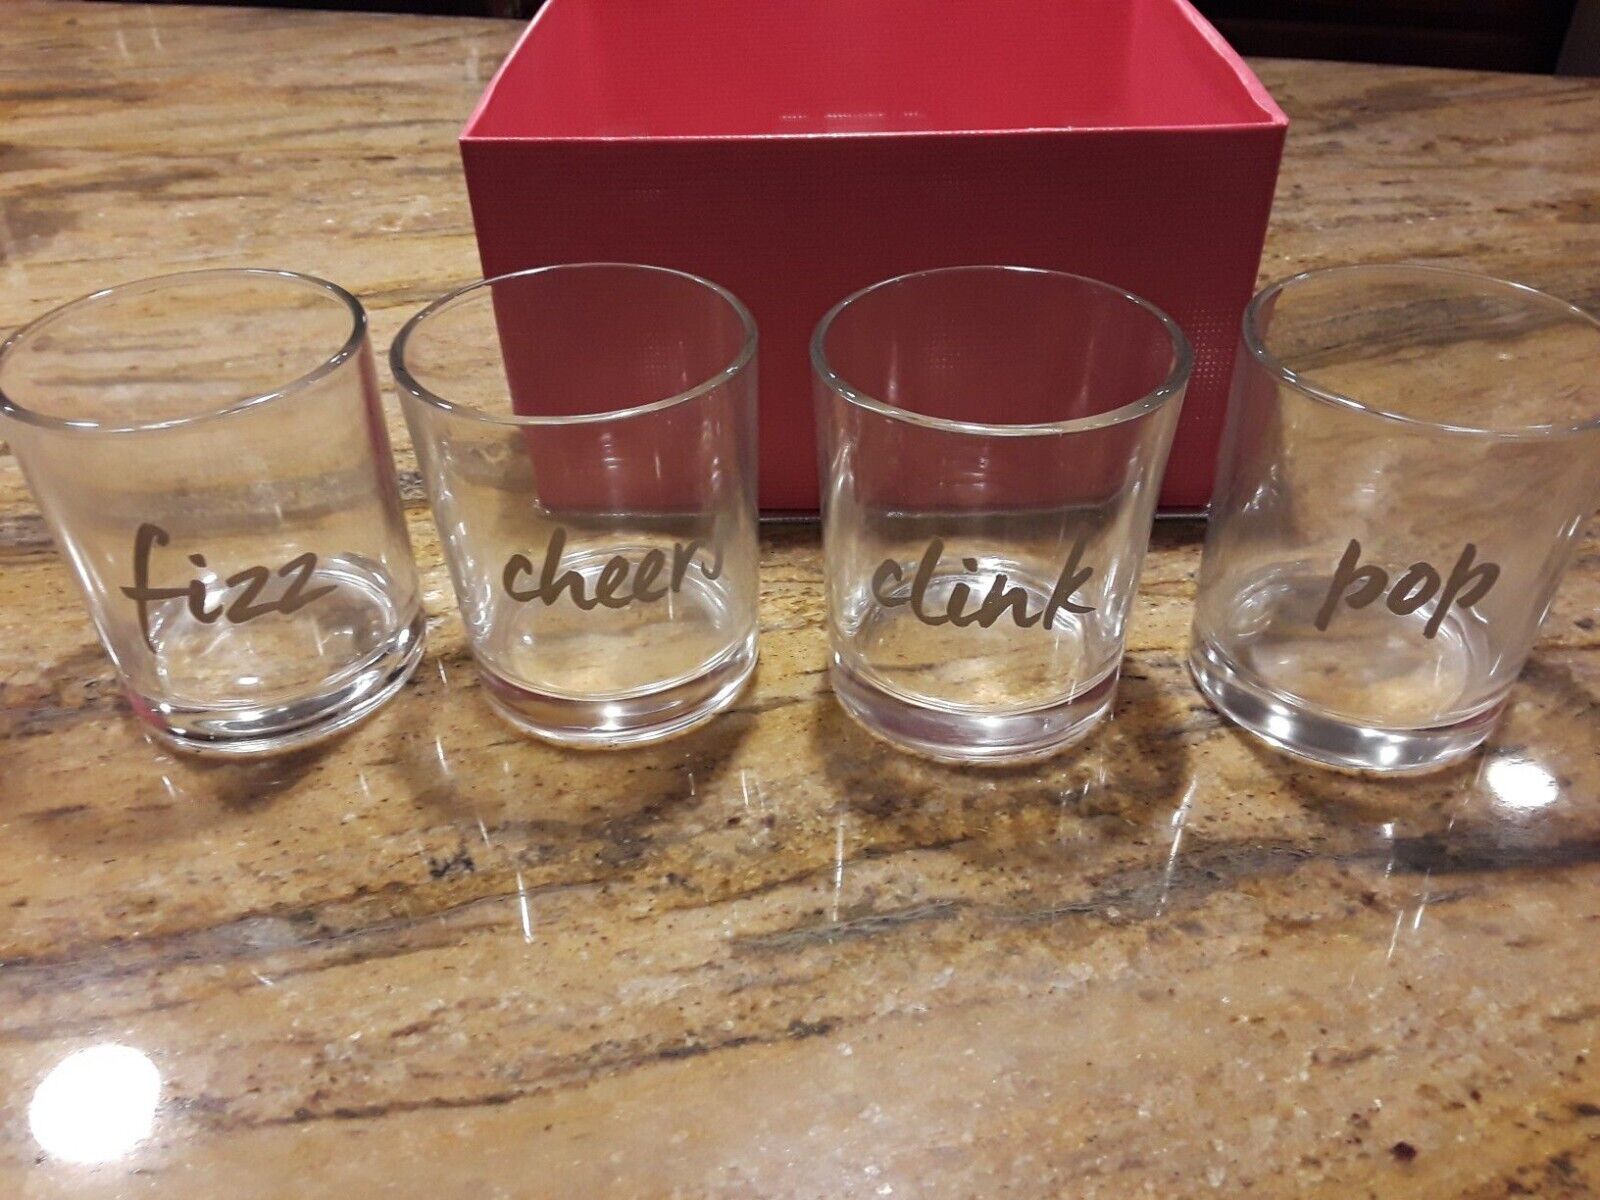 Ulta Set of 4 Highball Glasses in Gift Box- Fizz,Cheers,Clink,Pop- No Coasters